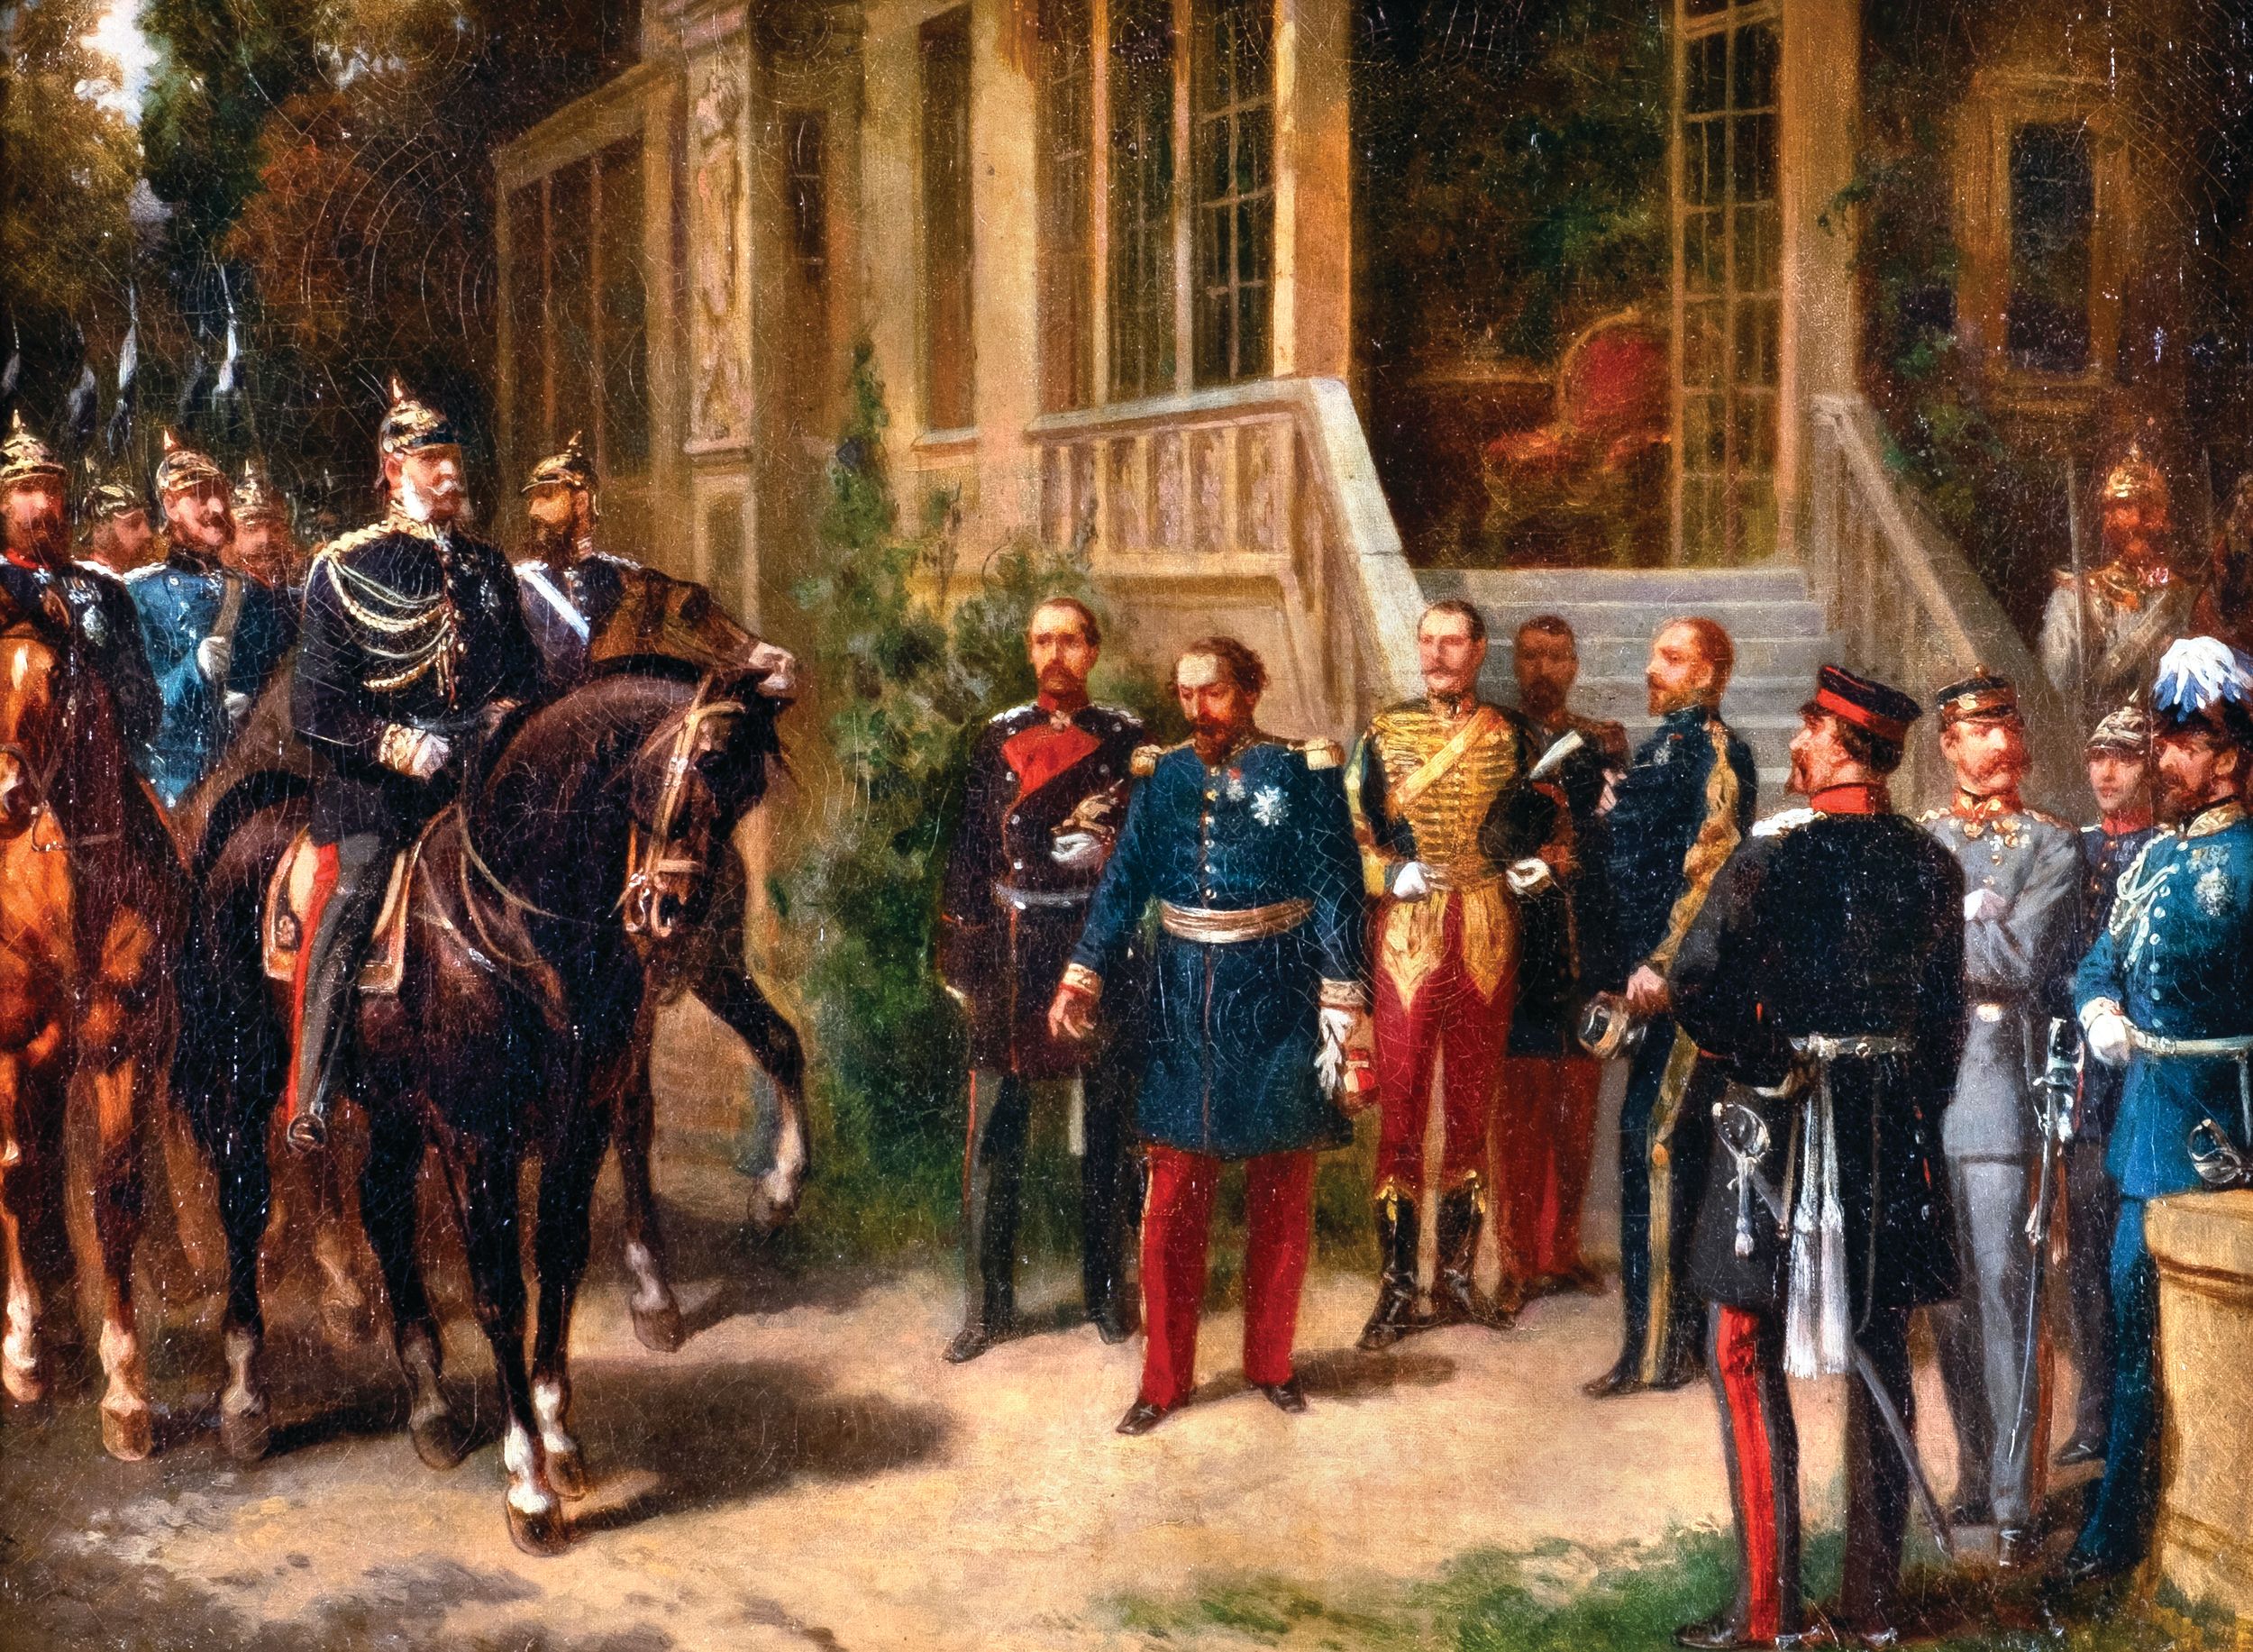 A dejected Emperor Napoleon III meets King William I and the Prussian high command after the battle. The Prussians took 100,000 French soldiers into captivity, but allowed the deposed emperor to go to England where he lived in exile.